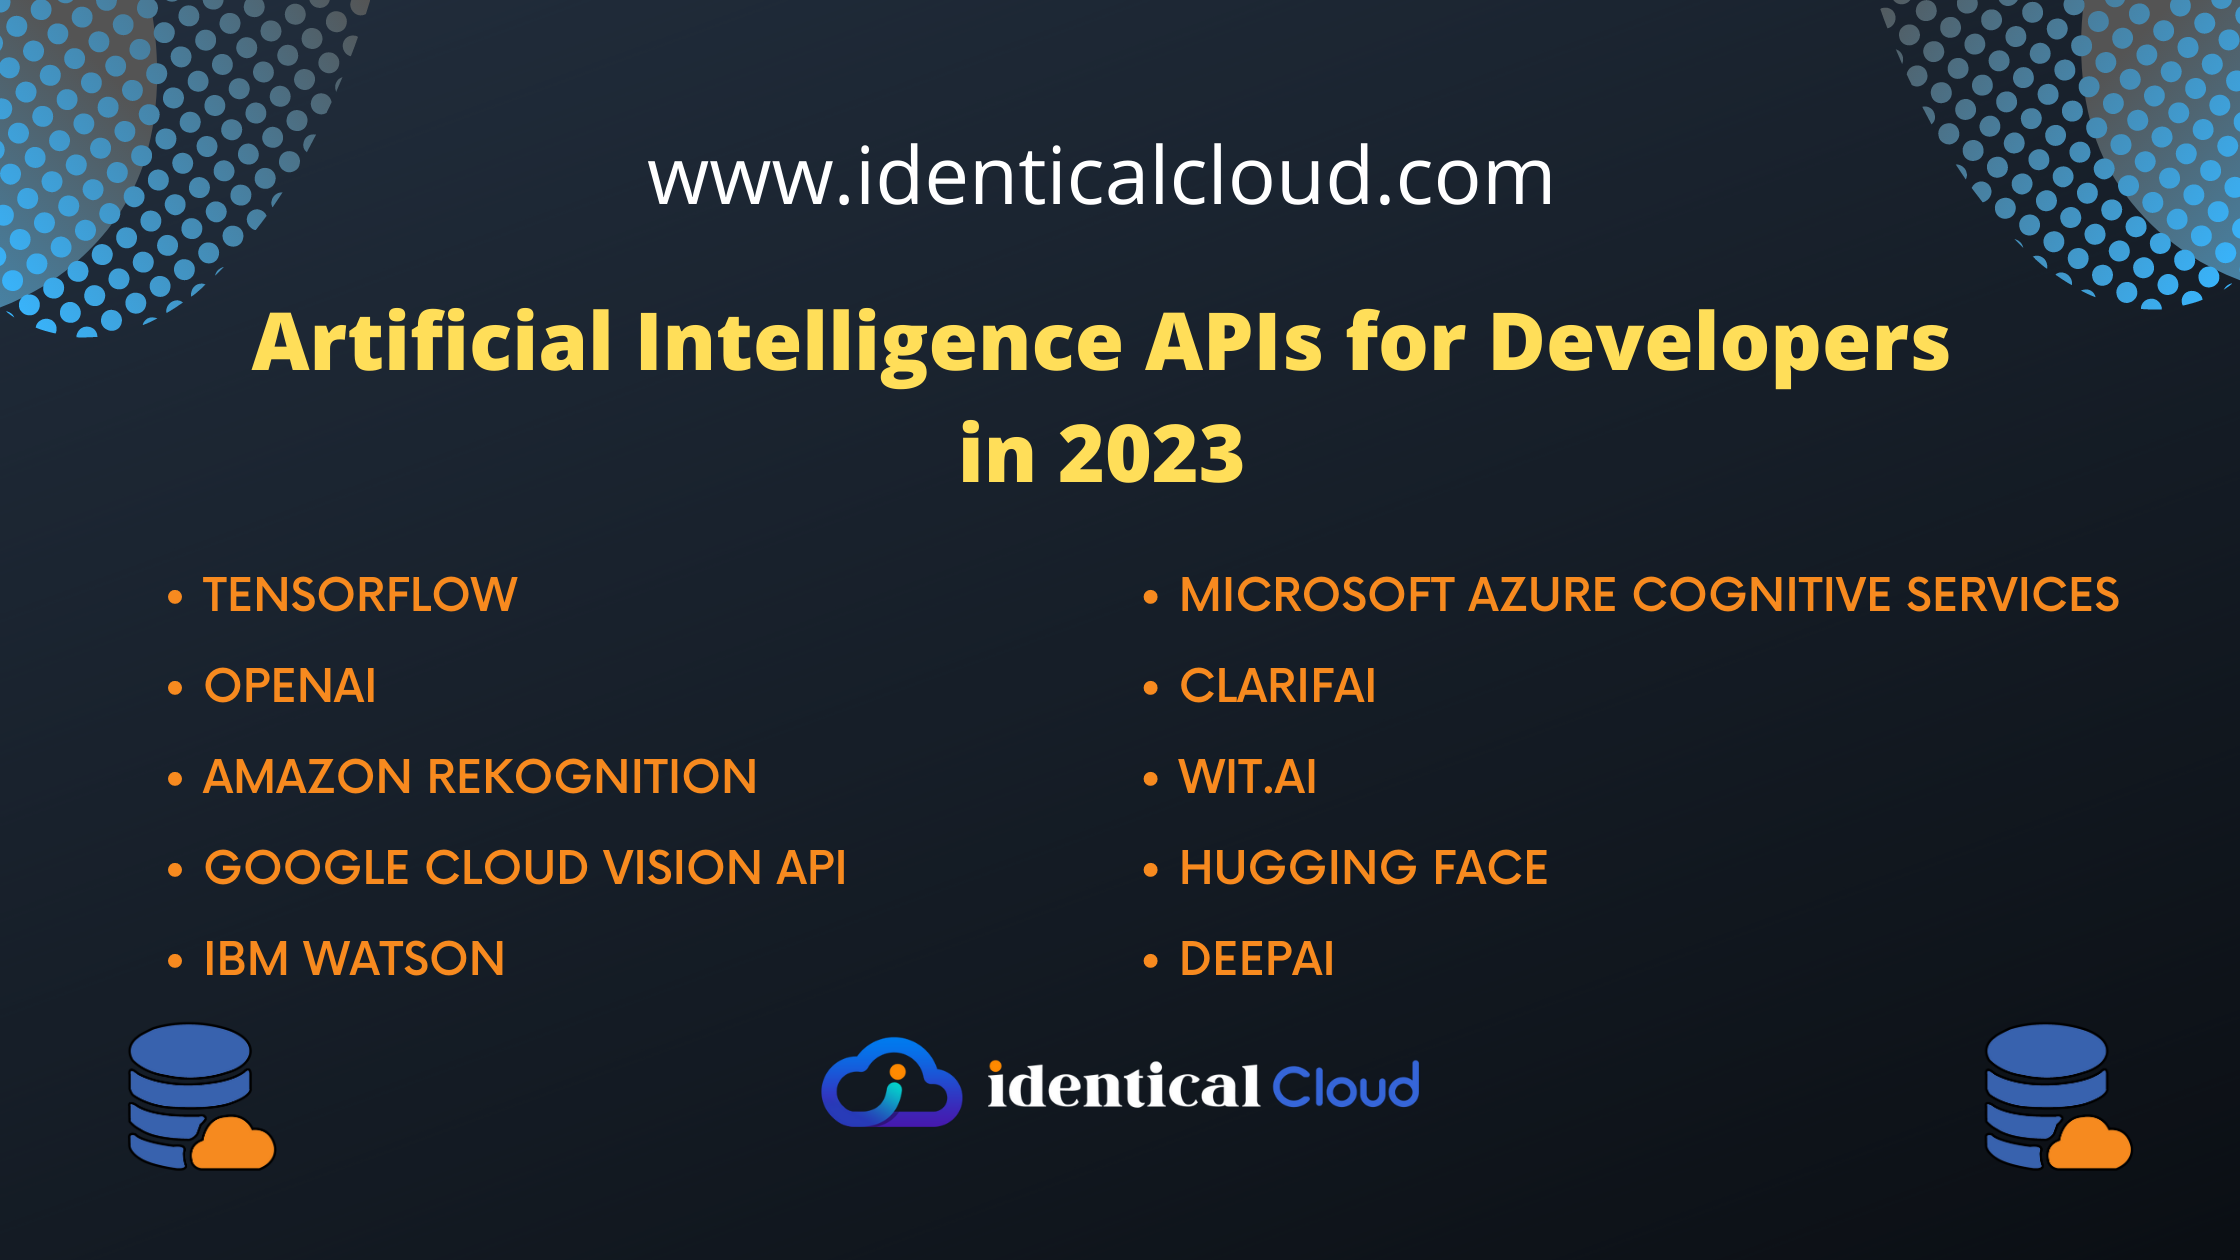 Artificial Intelligence APIs for Developers in 2023 - identicalcloud.com